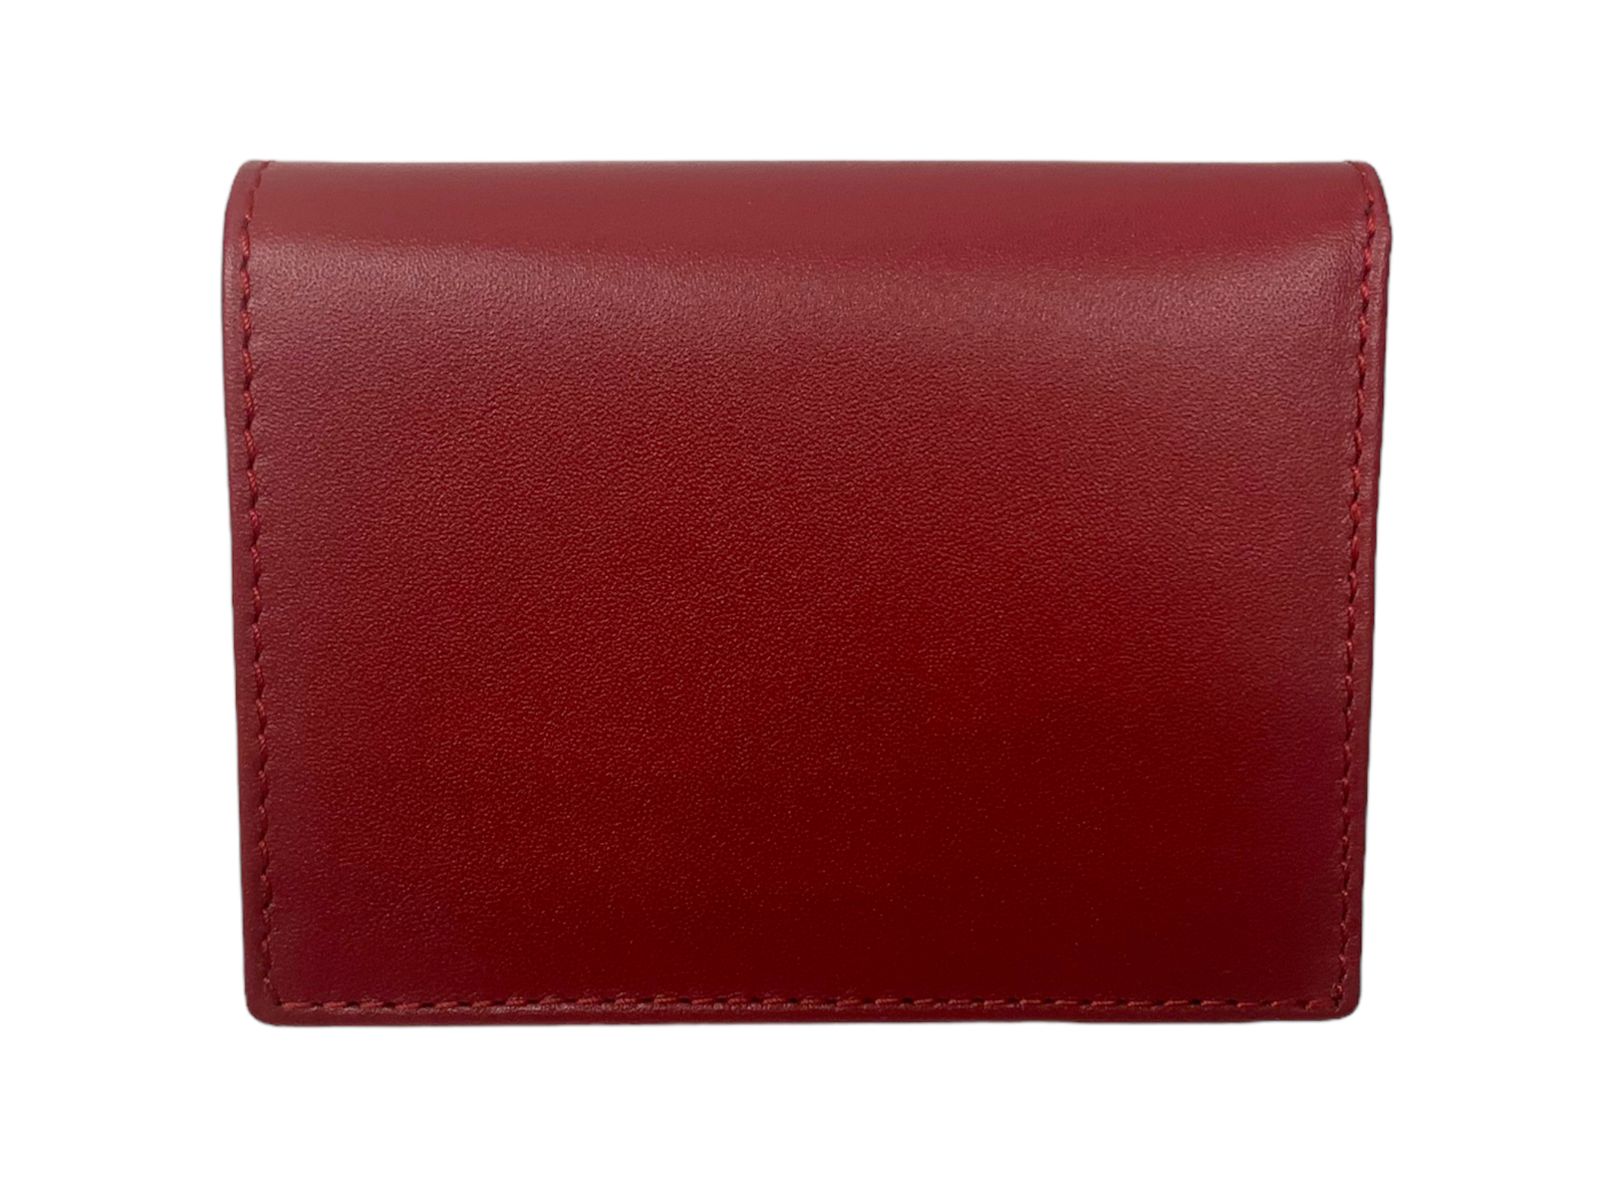 COMME des GARCONS (コムデギャルソン) CLASSIC LINE WALLET RD 二 